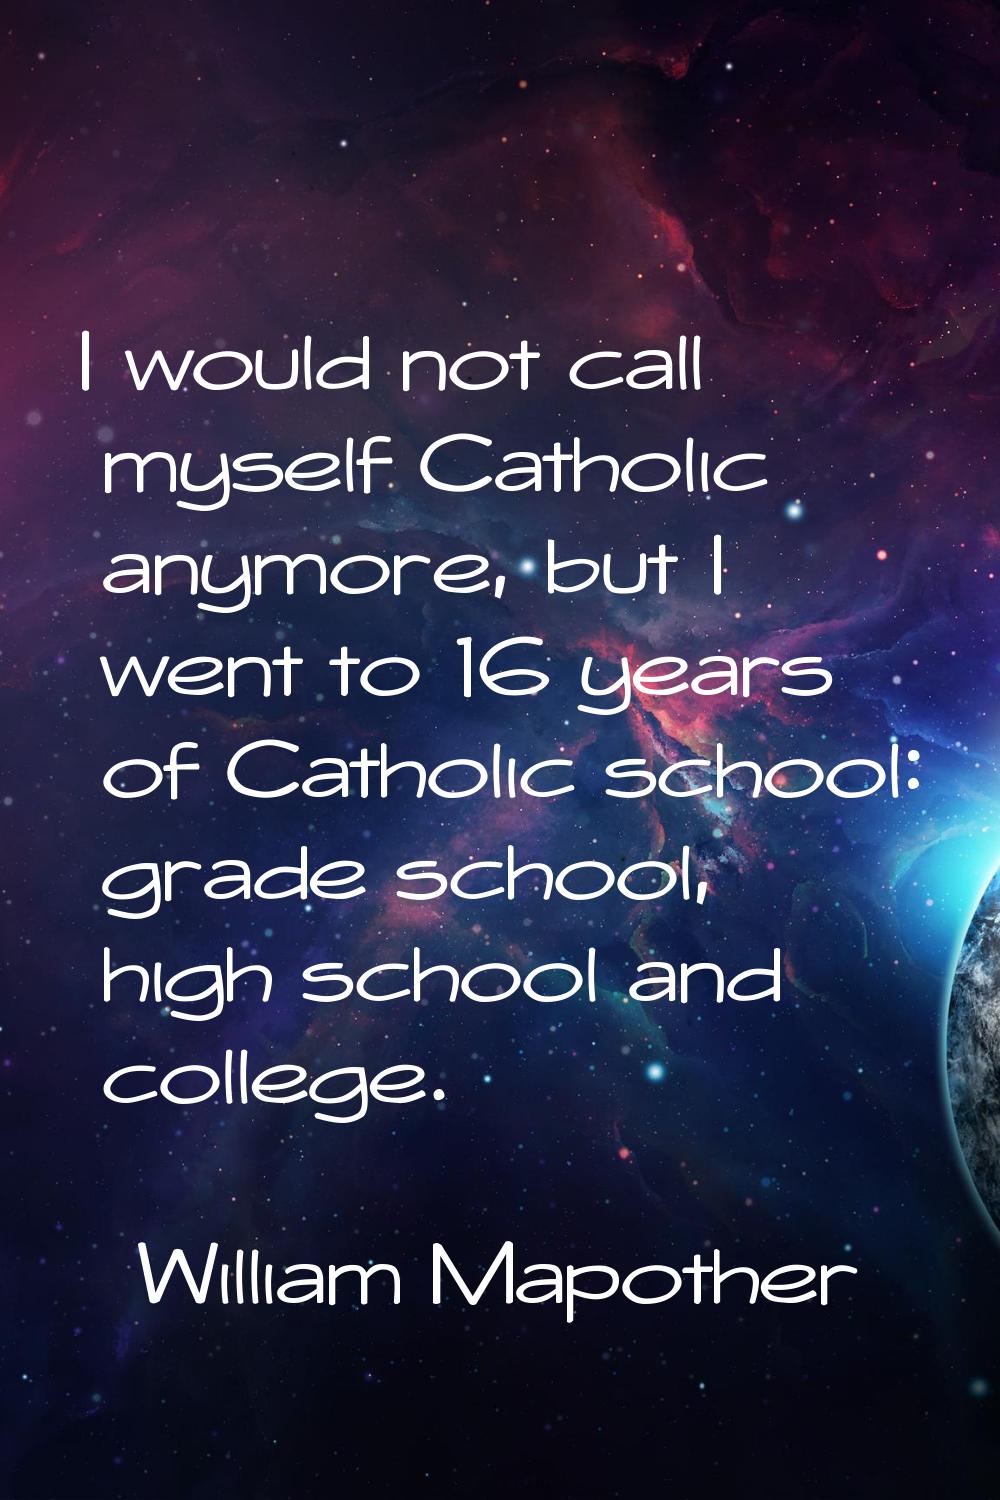 I would not call myself Catholic anymore, but I went to 16 years of Catholic school: grade school, 